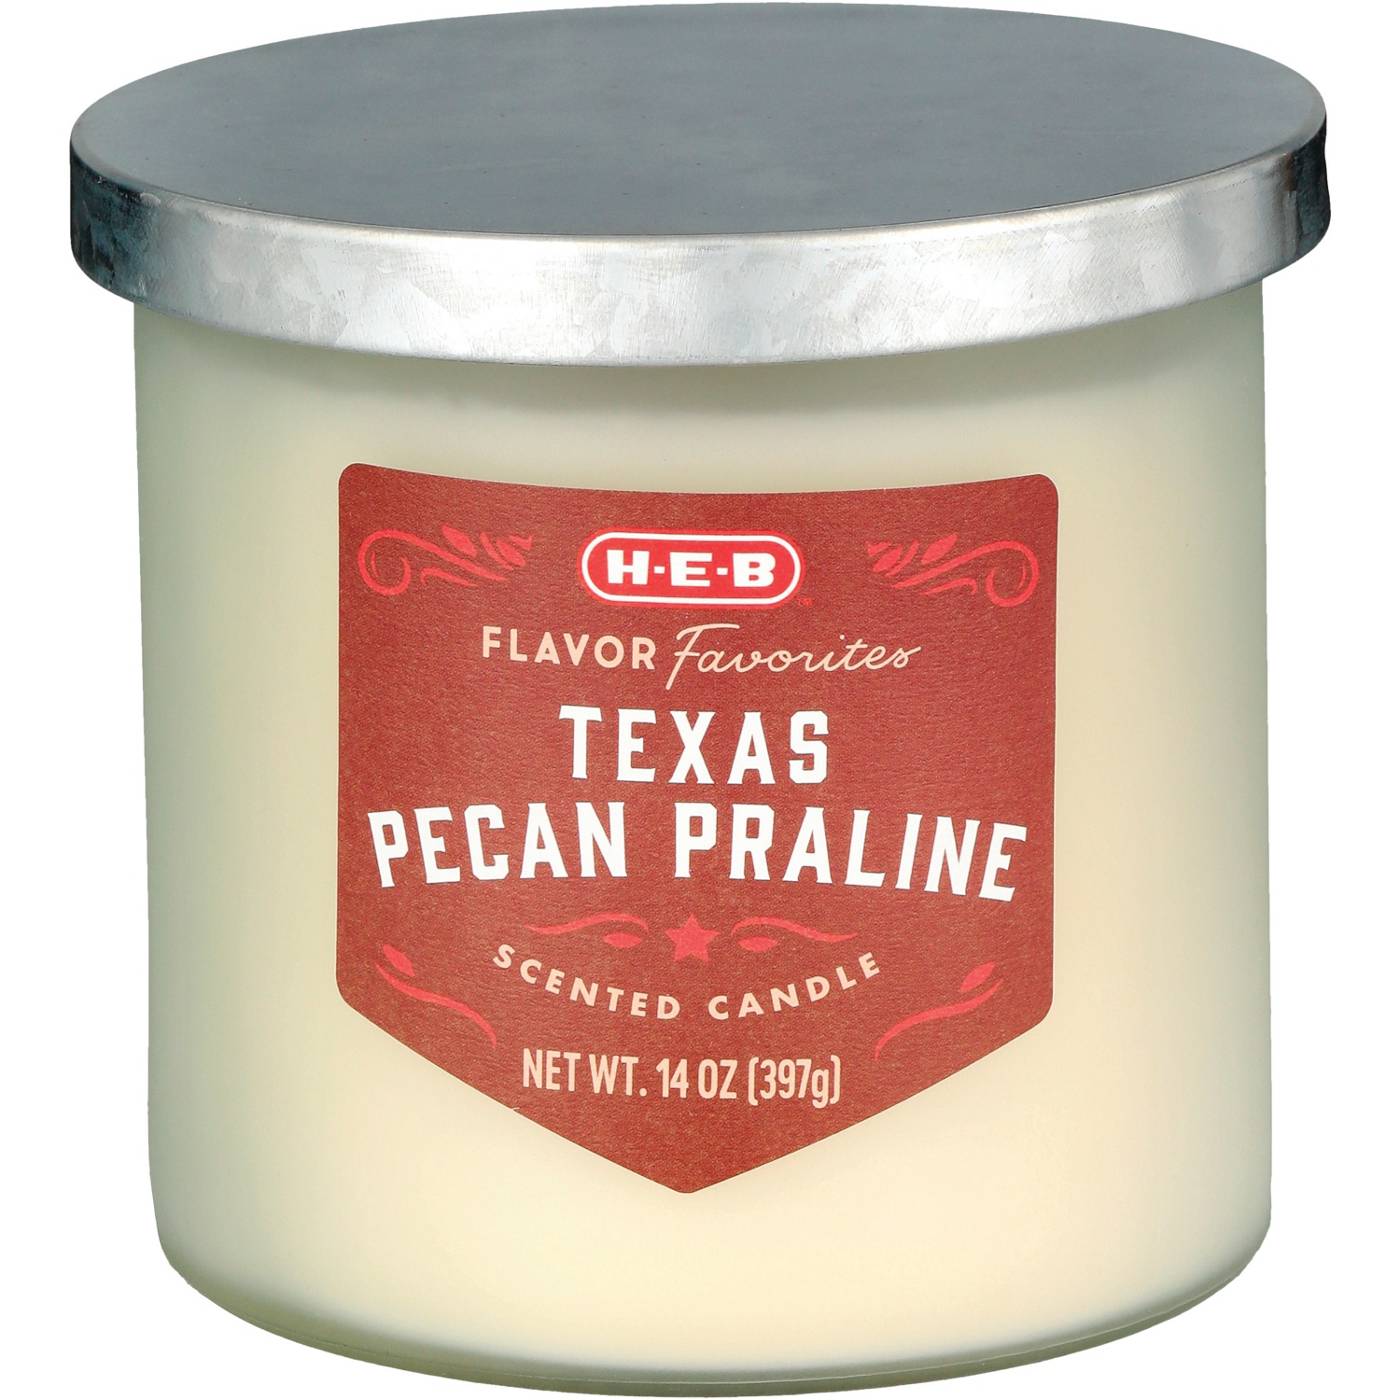 H-E-B Flavor Favorites Texas Pecan Pralines Scented Candle; image 2 of 2